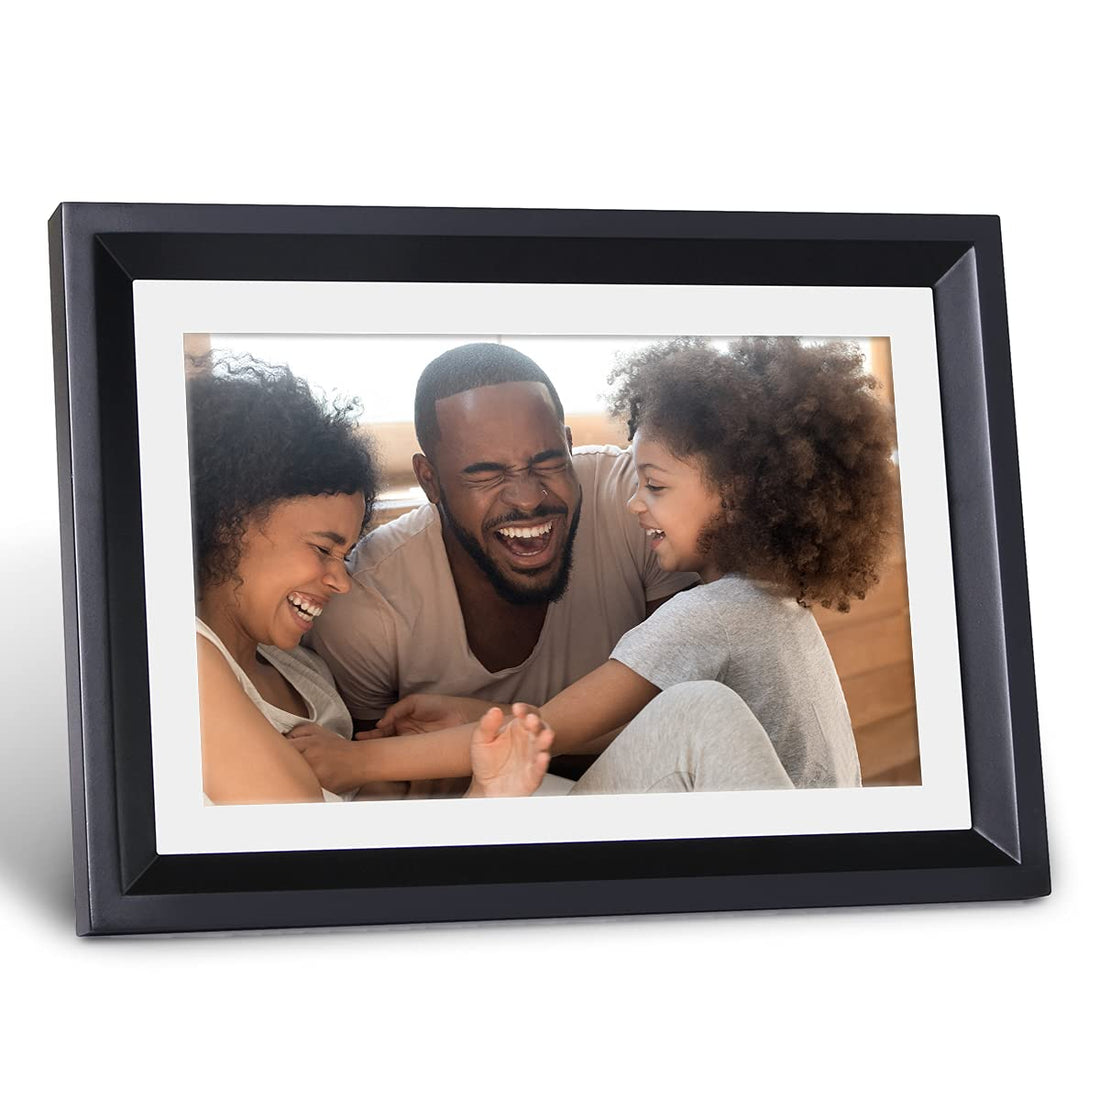 LOVCUBE Digital Picture Frame 10.1 inch WiFi Digital Photo Frame with HD Touch Screen Auto-Rotate Share Photos and Videos via App Anytime and Anywhere(Black)